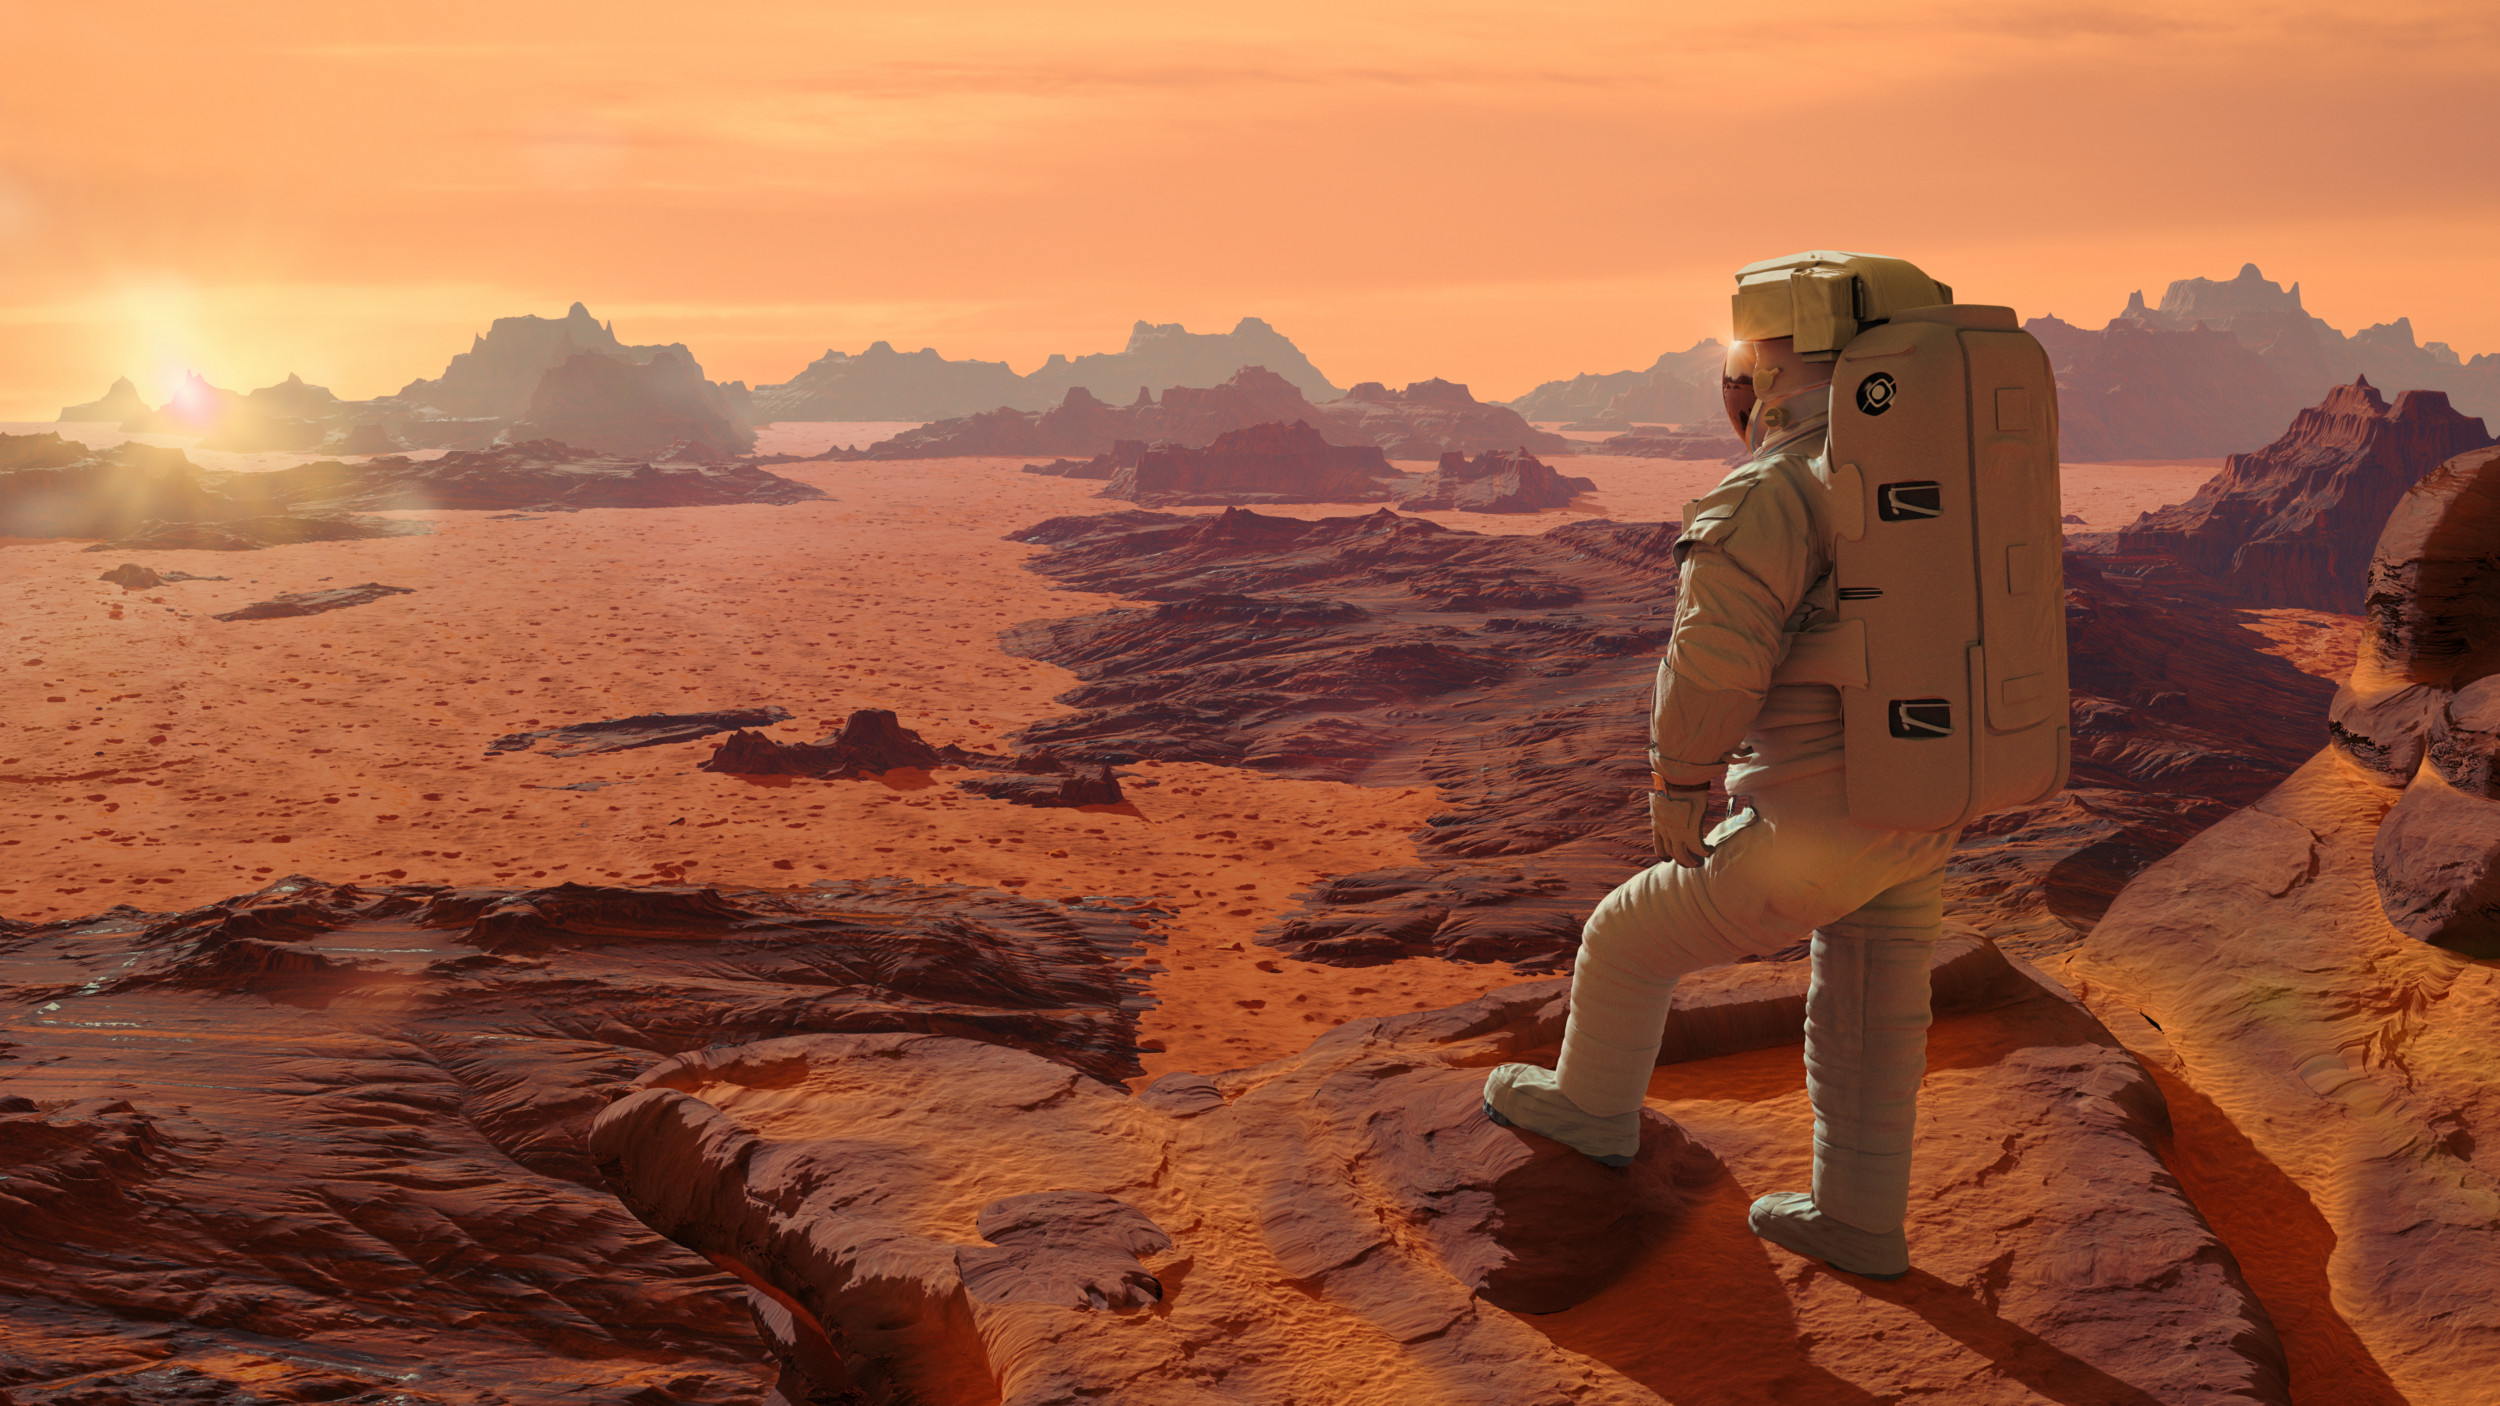 Humans Could Land on Mars in 5 to 10 Years, if Elon Musk Has His Way